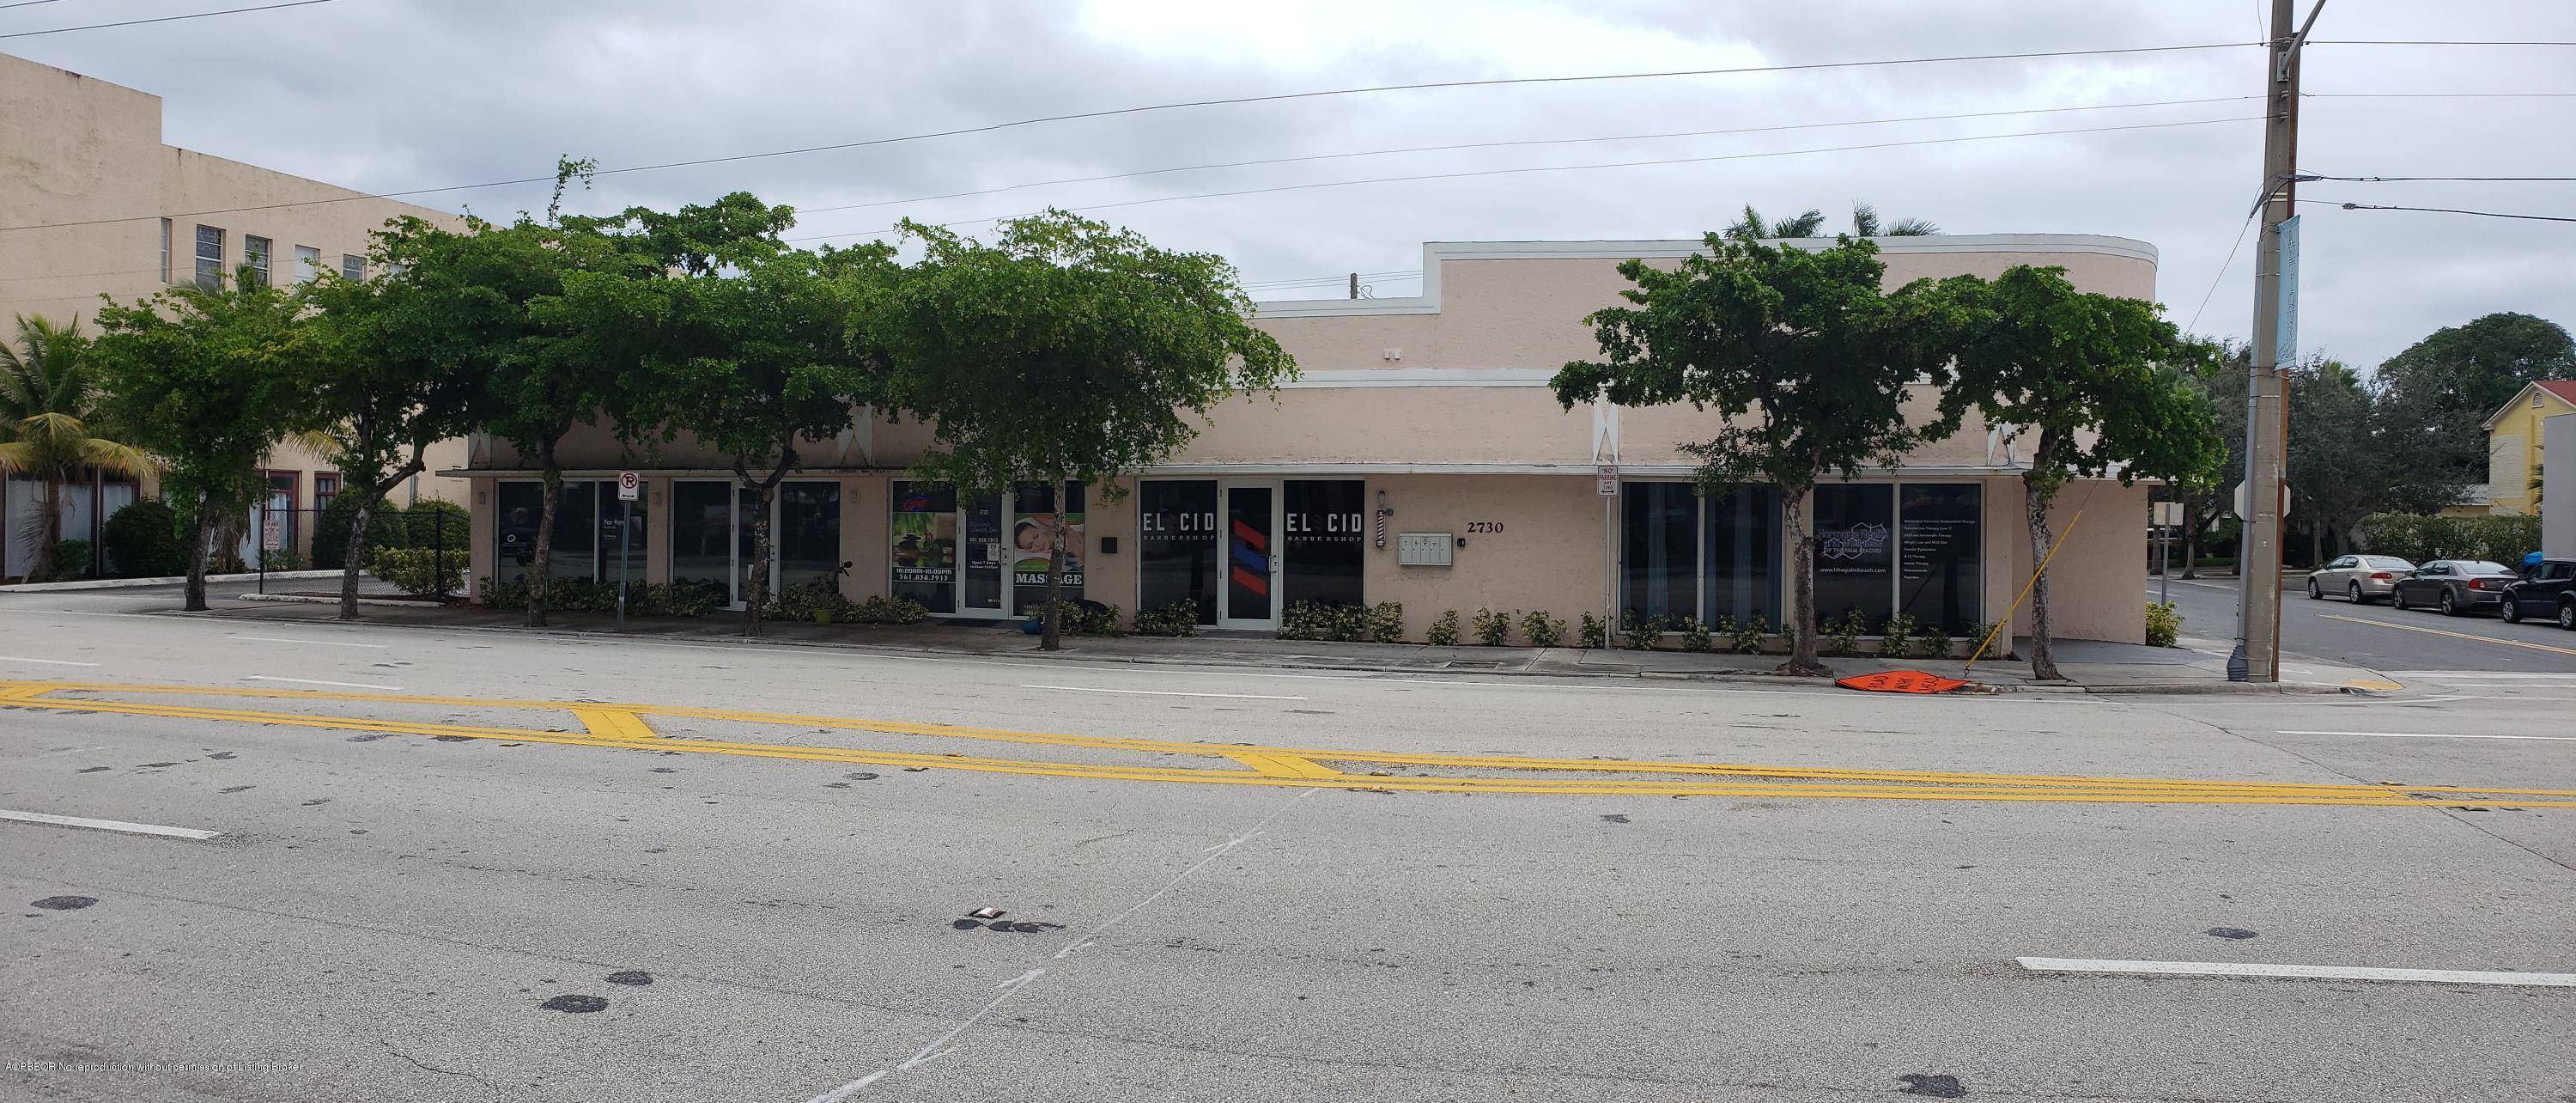 4 Unit Multi Tenant Commercial Retail Plaza with bonus Residential Apt upstairs.